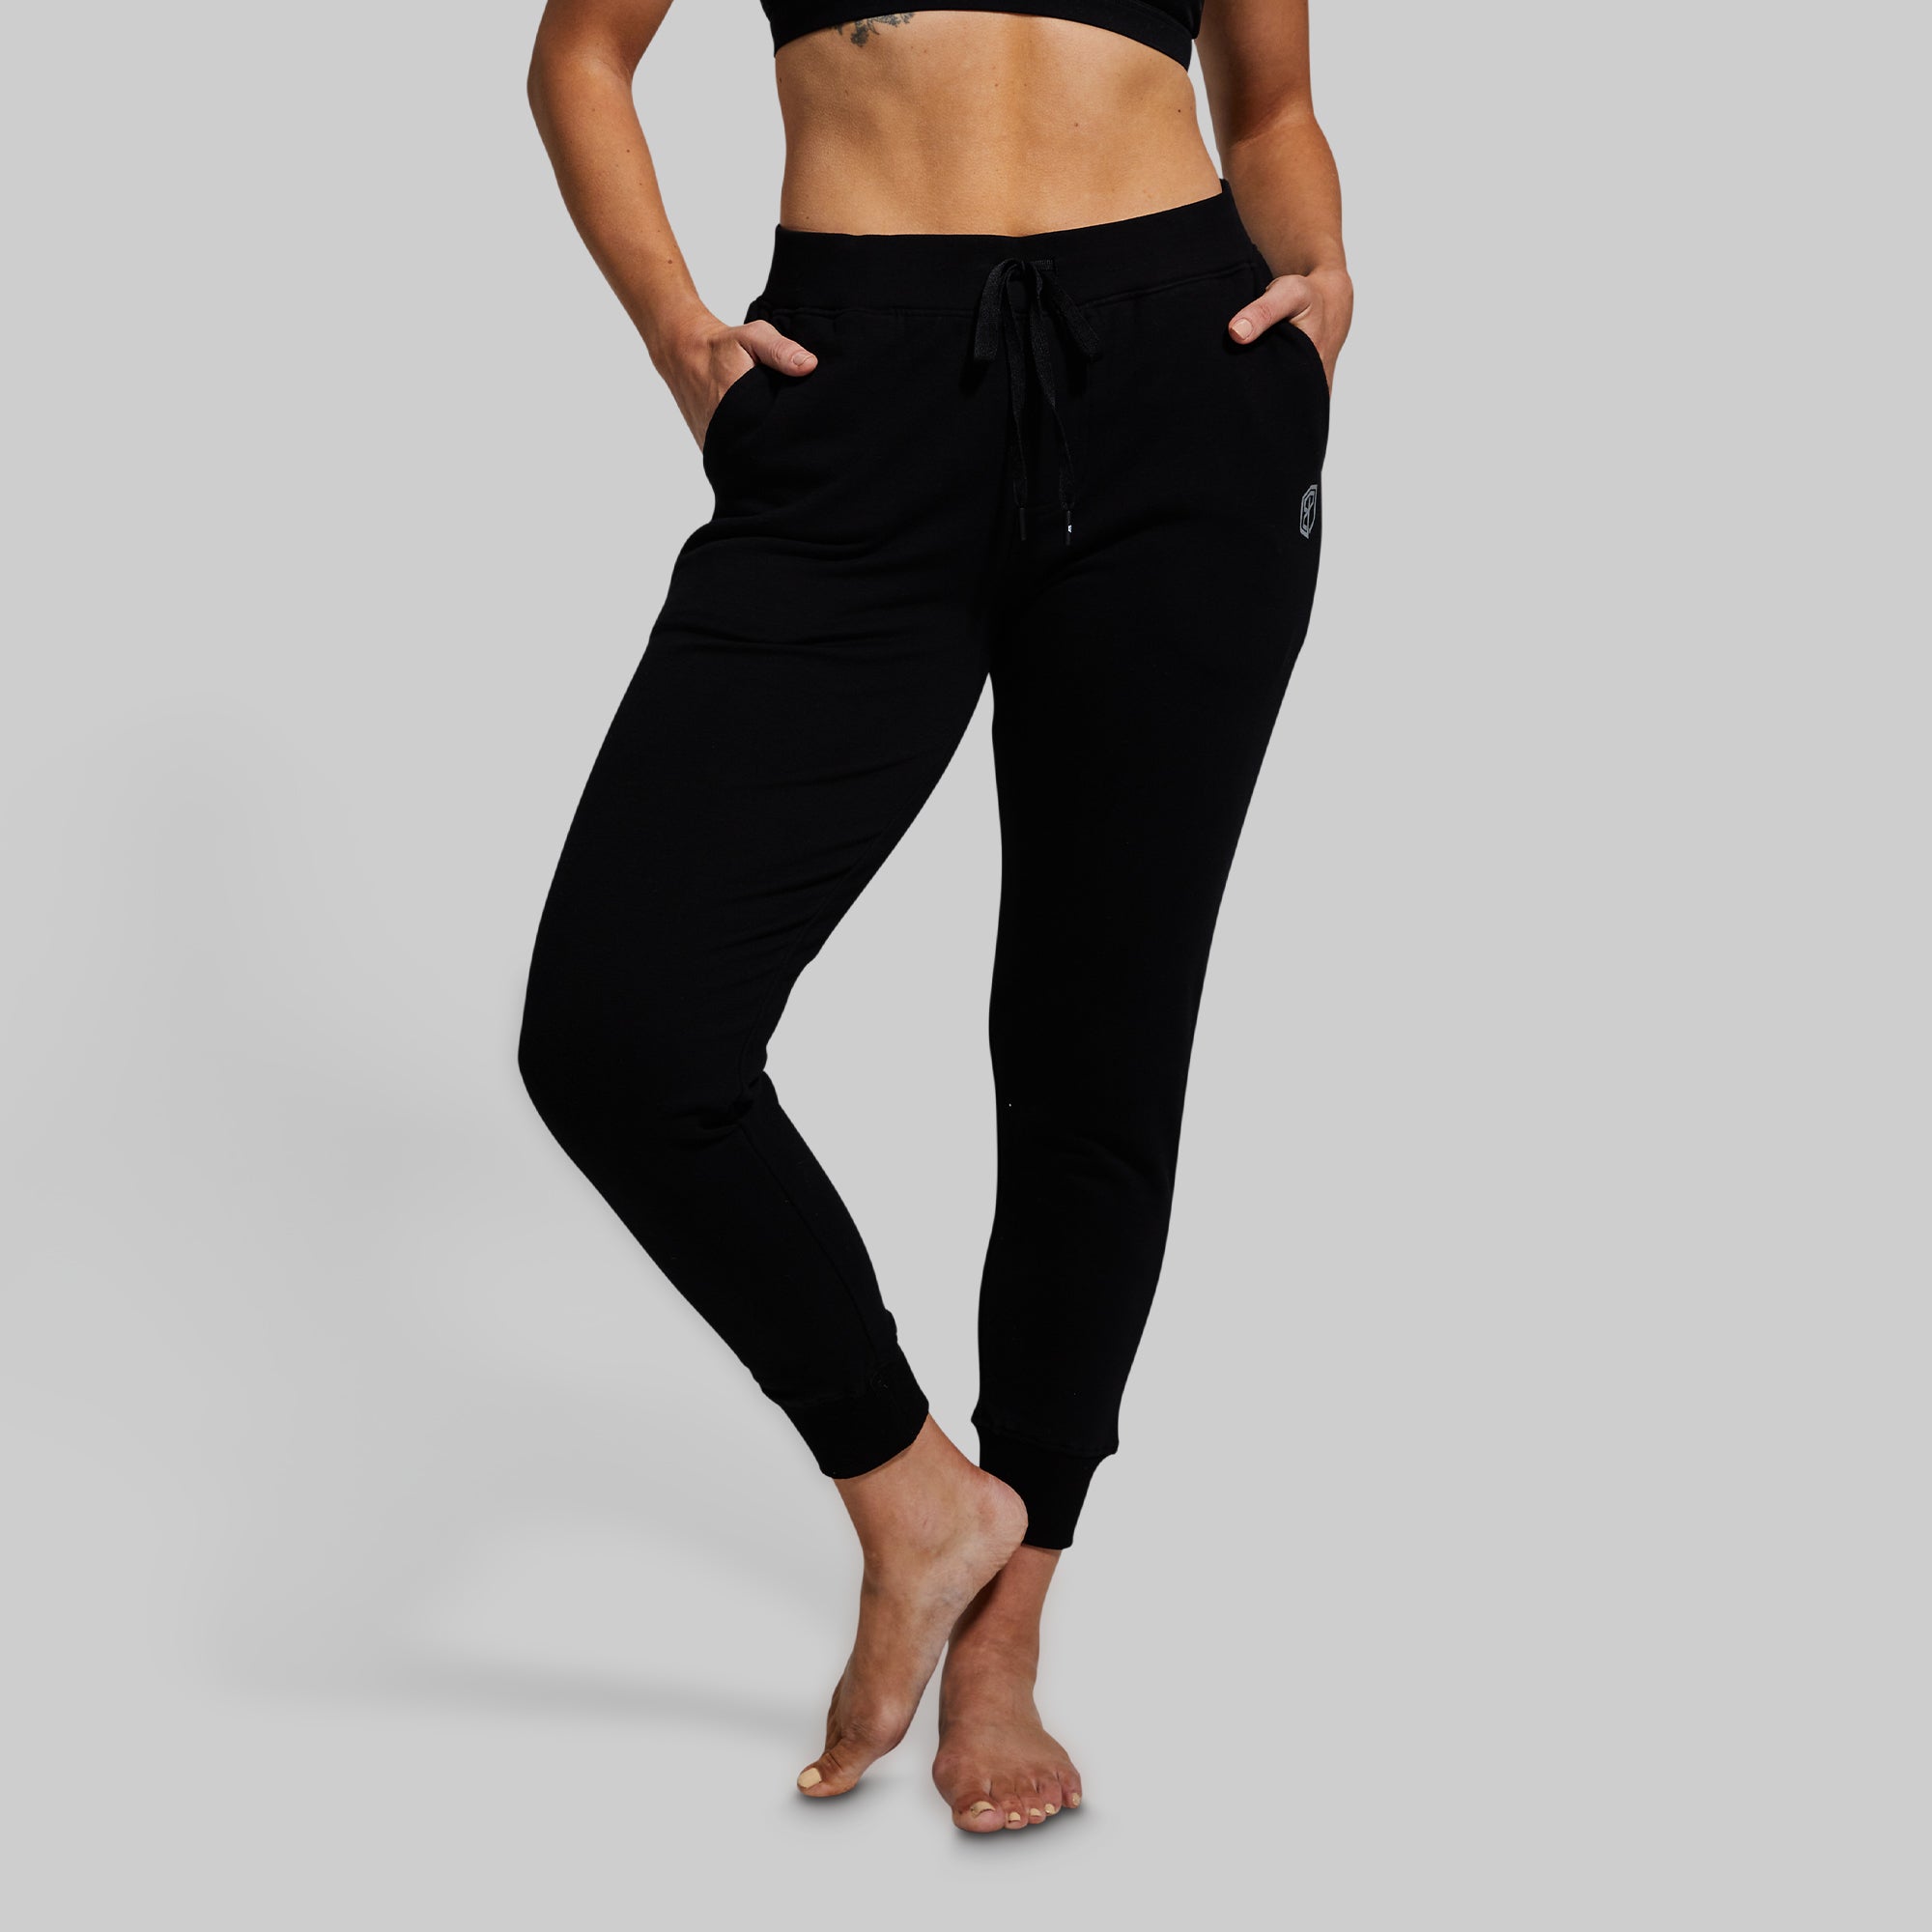  Born Primitive Rest Day Athleisure Jogger for Women,  Comfortable Women's Pants with Zipper Pockets, Lightweight & Quick-Drying  Joggers, Perfect for Lifting or Relaxing - Black, Extra Small : Clothing,  Shoes 